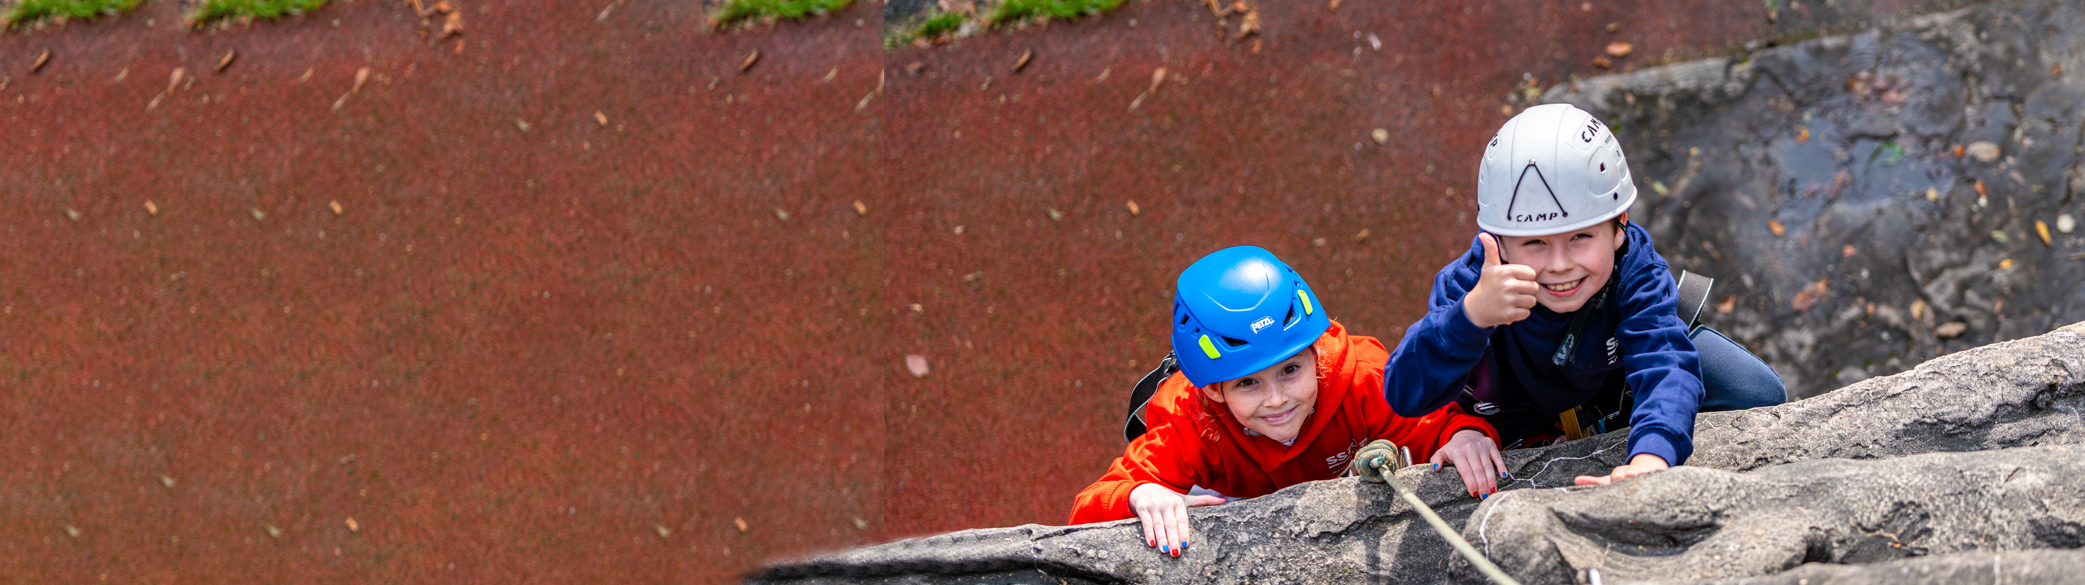 A wide-angled photograph from aerial view down the outdoor climbing wall of two boys climbing upwards and smiling towards the camera. One boy has his thumb up at the camera too.